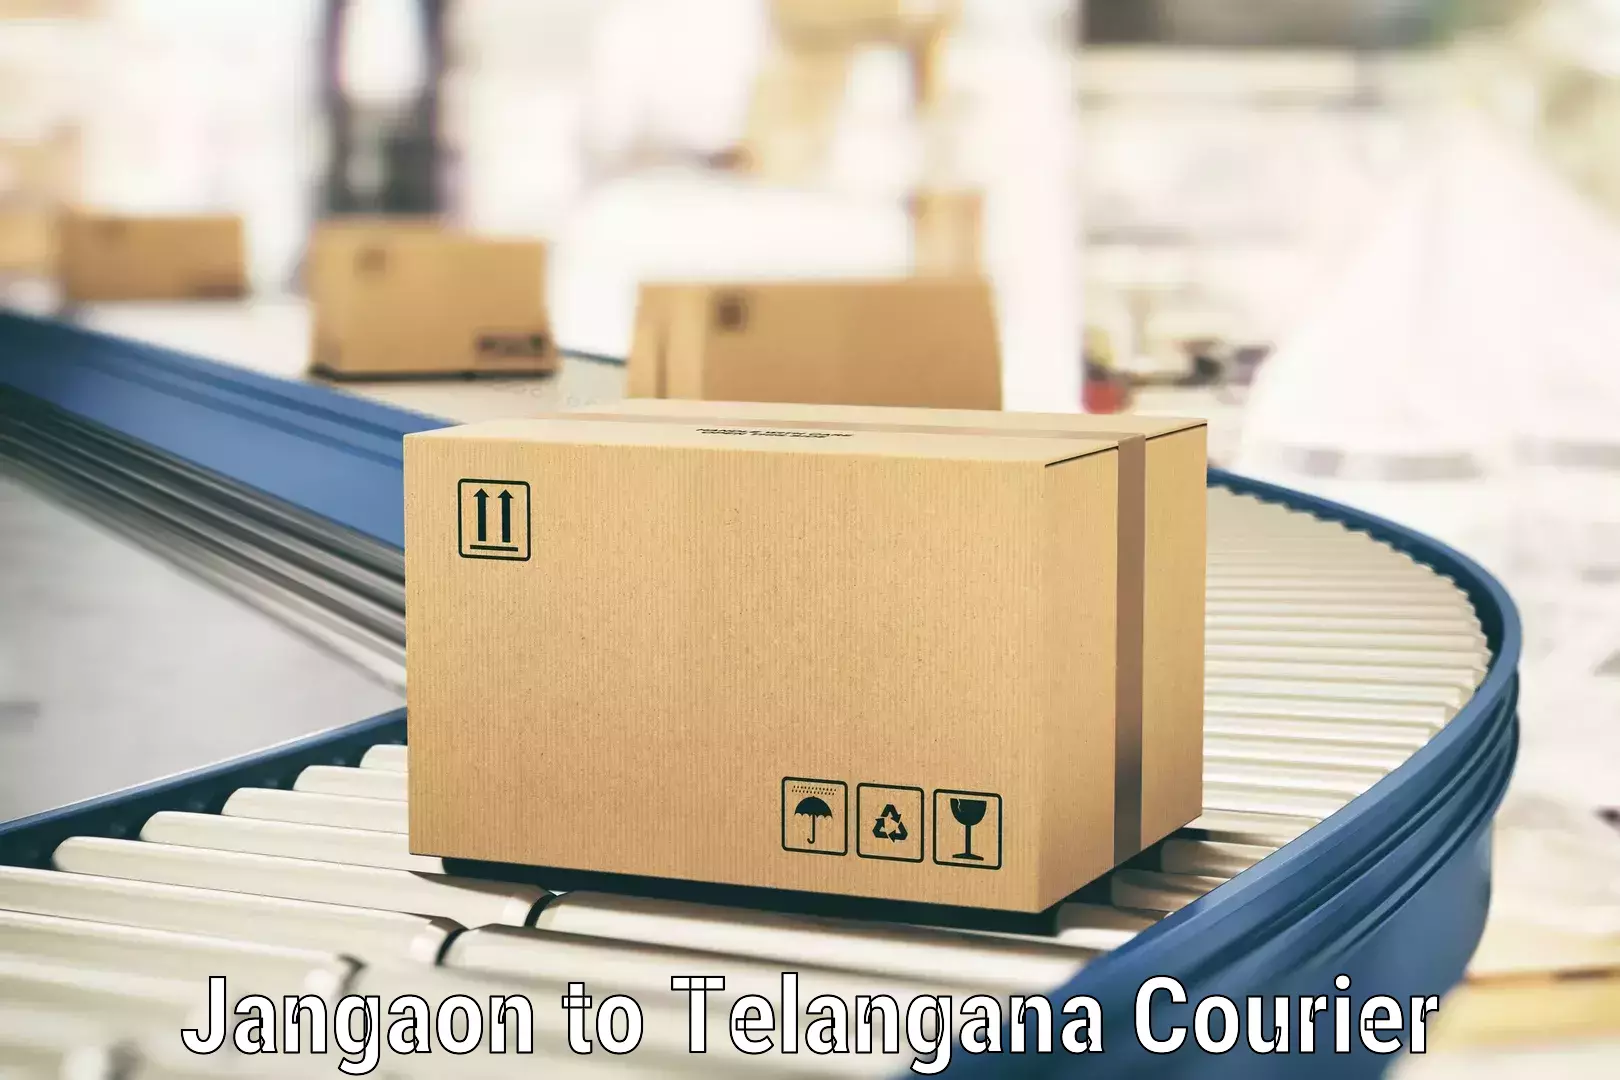 Efficient parcel tracking in Jangaon to Dahegaon